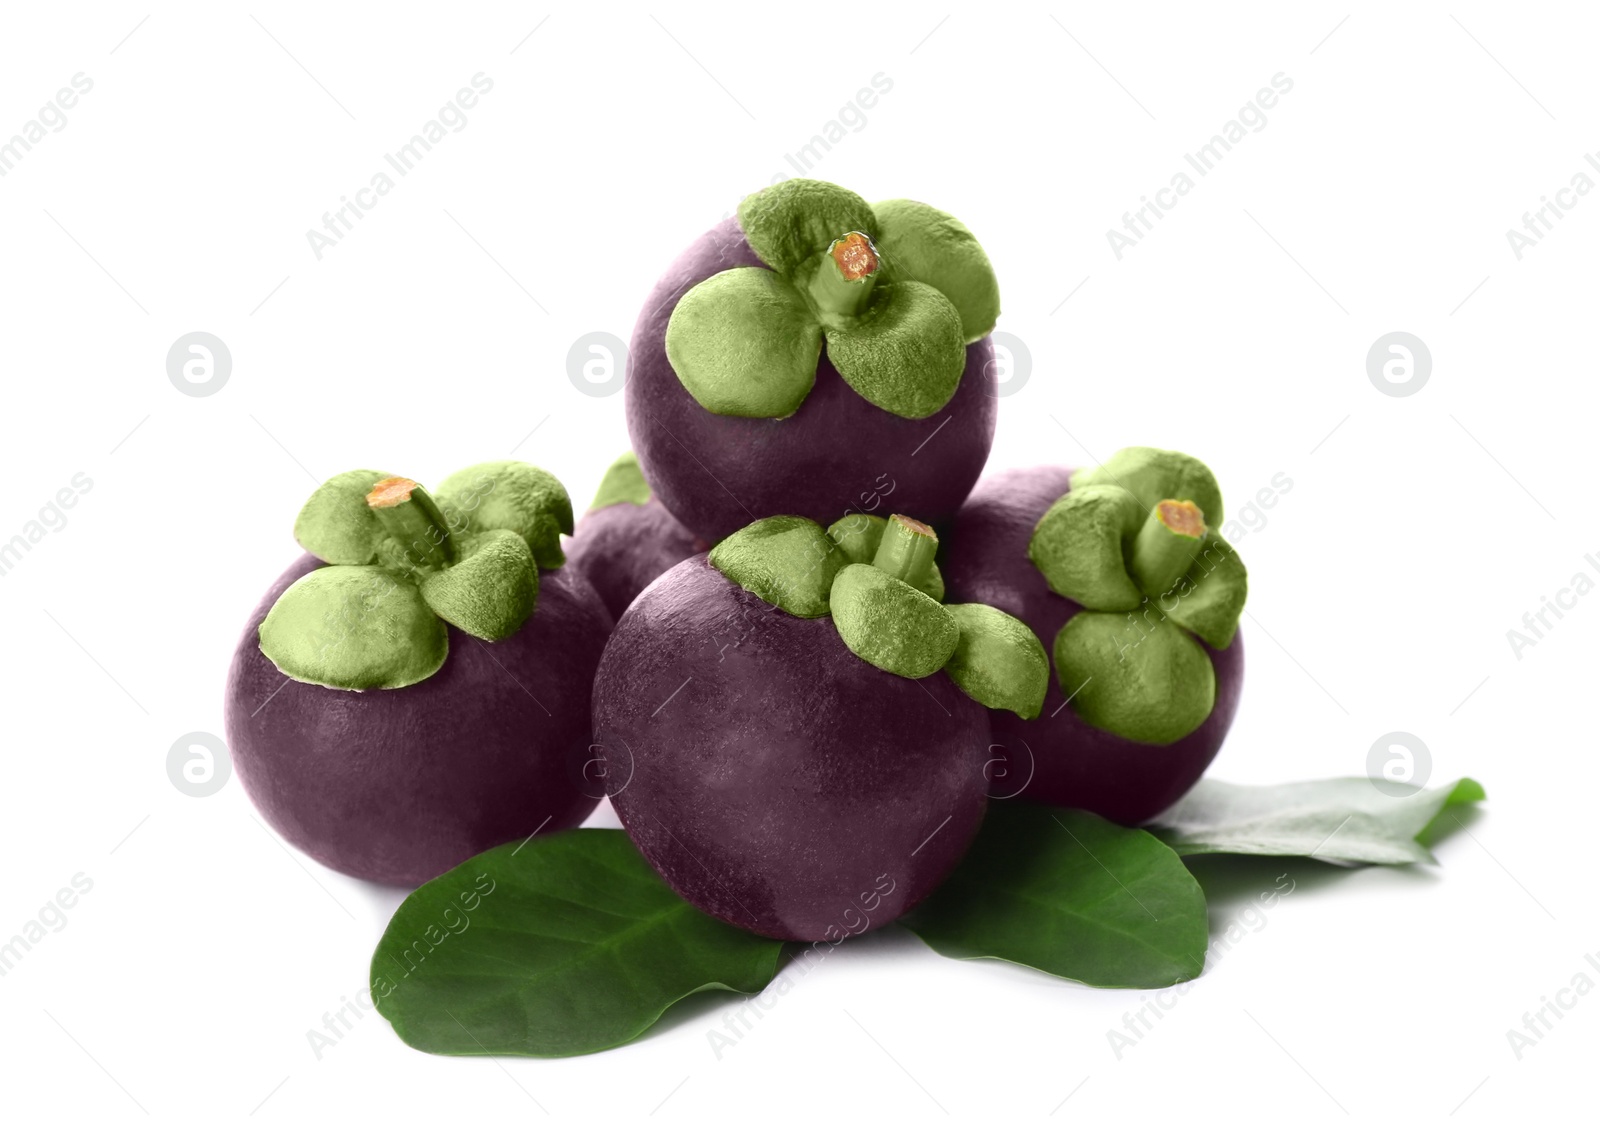 Photo of Fresh mangosteen fruits with green leaves on white background